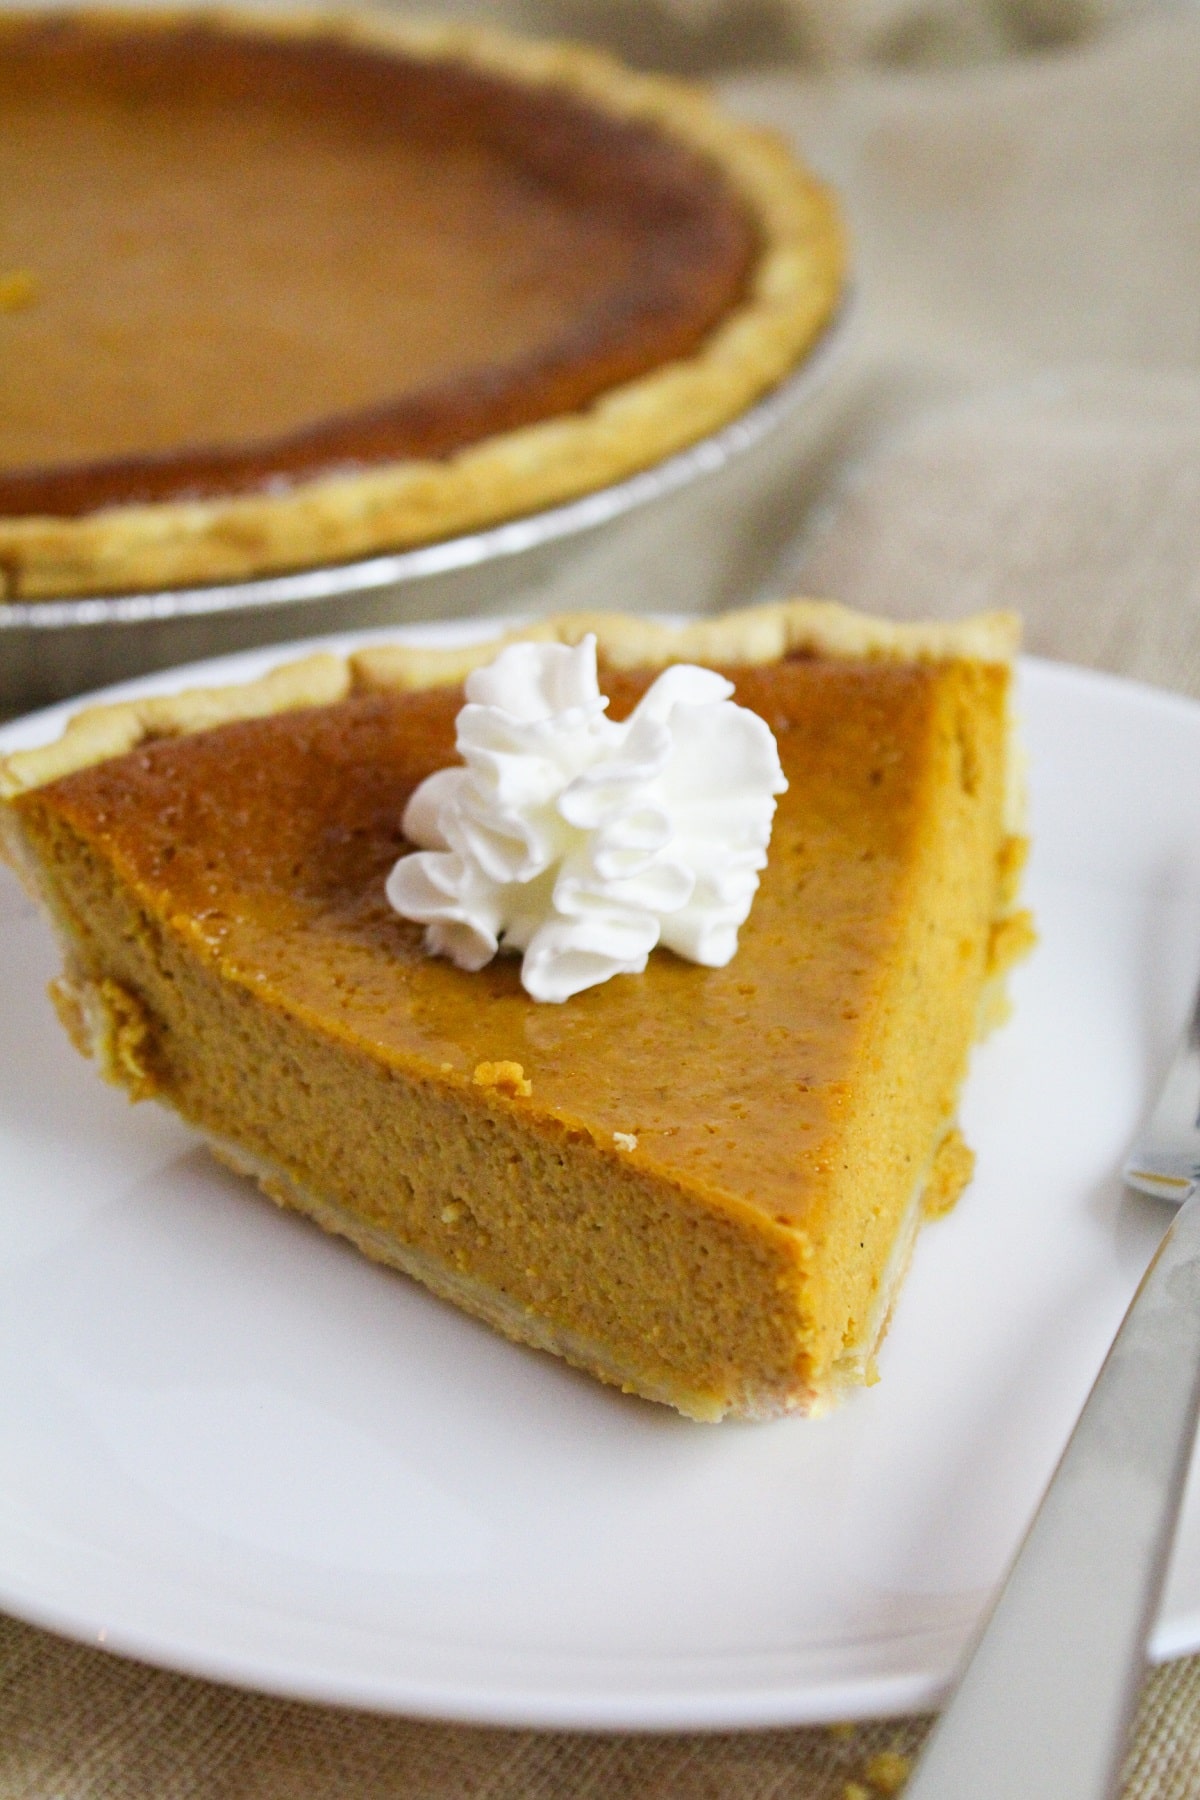 pumpkin pie on a white plate with whipped cream.